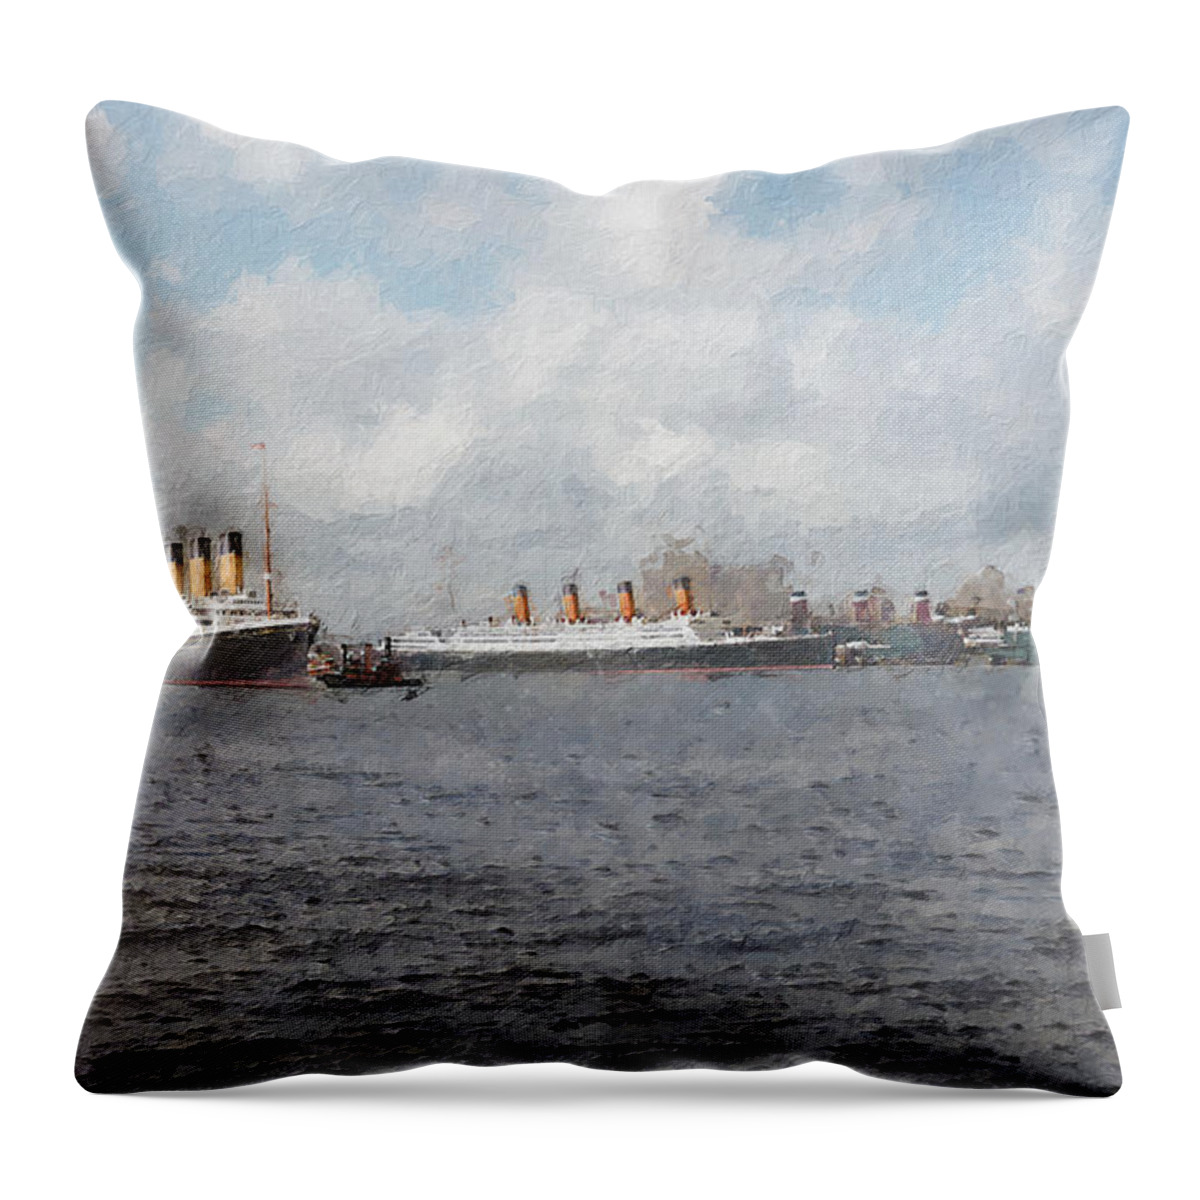 Steamer Throw Pillow featuring the digital art Olympic and Aquitania by Geir Rosset